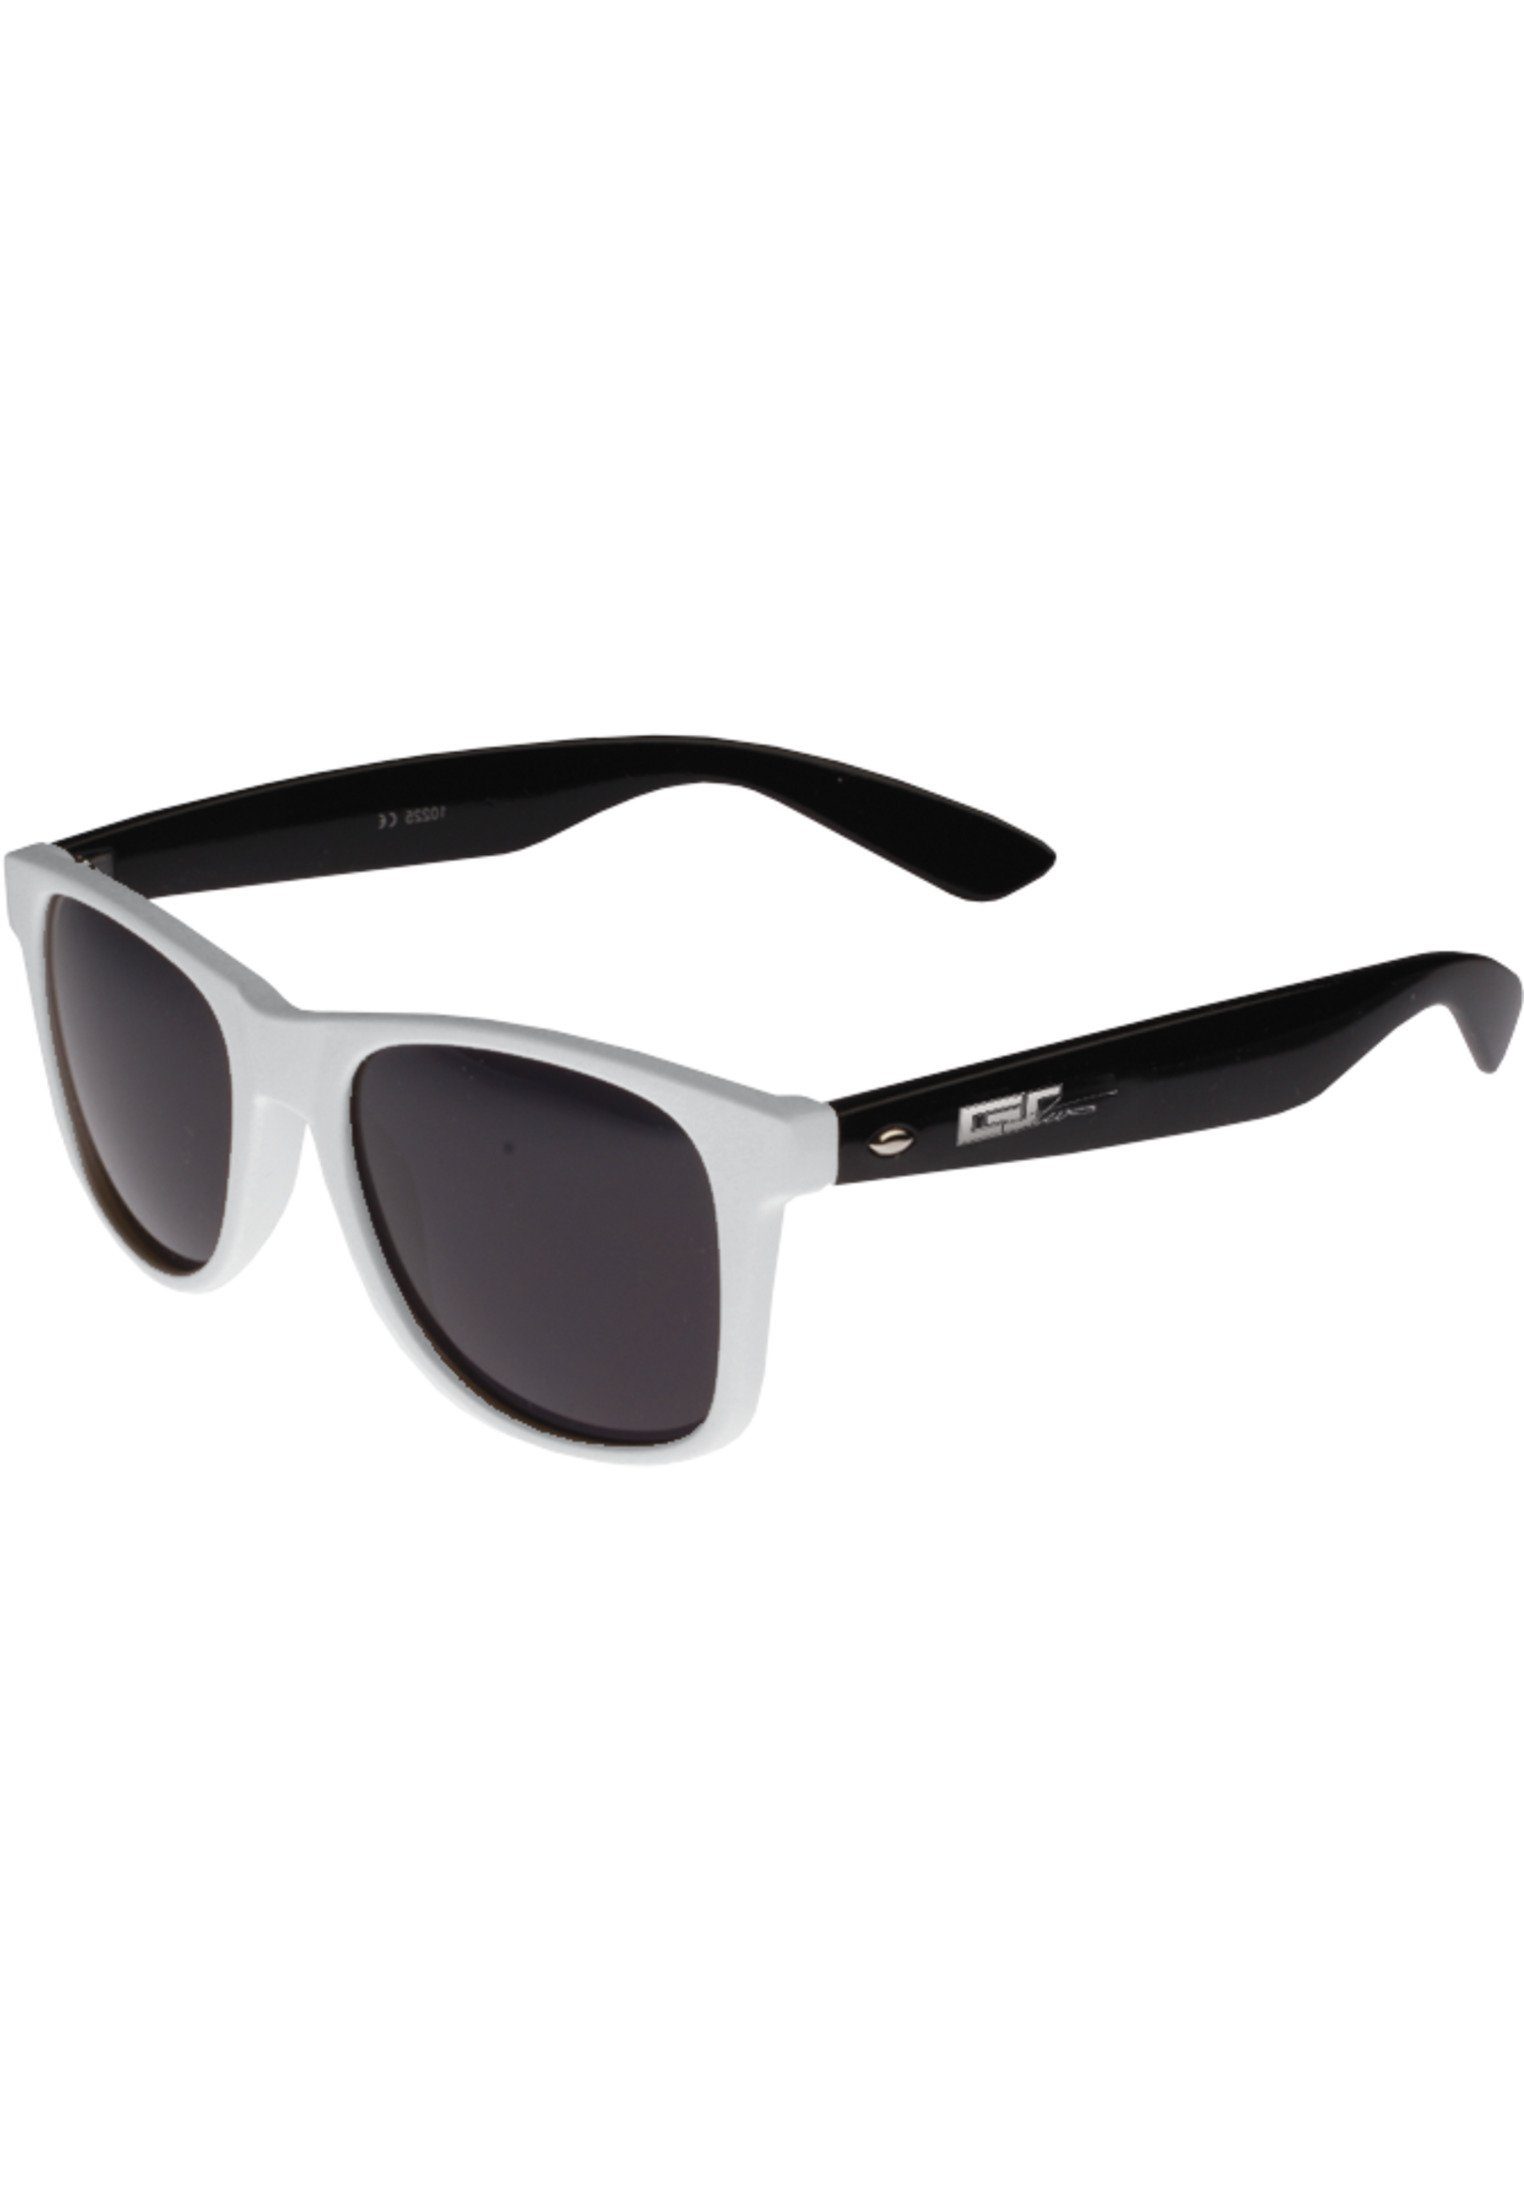 MSTRDS Sonnenbrille Accessoires Groove GStwo Shades white/black